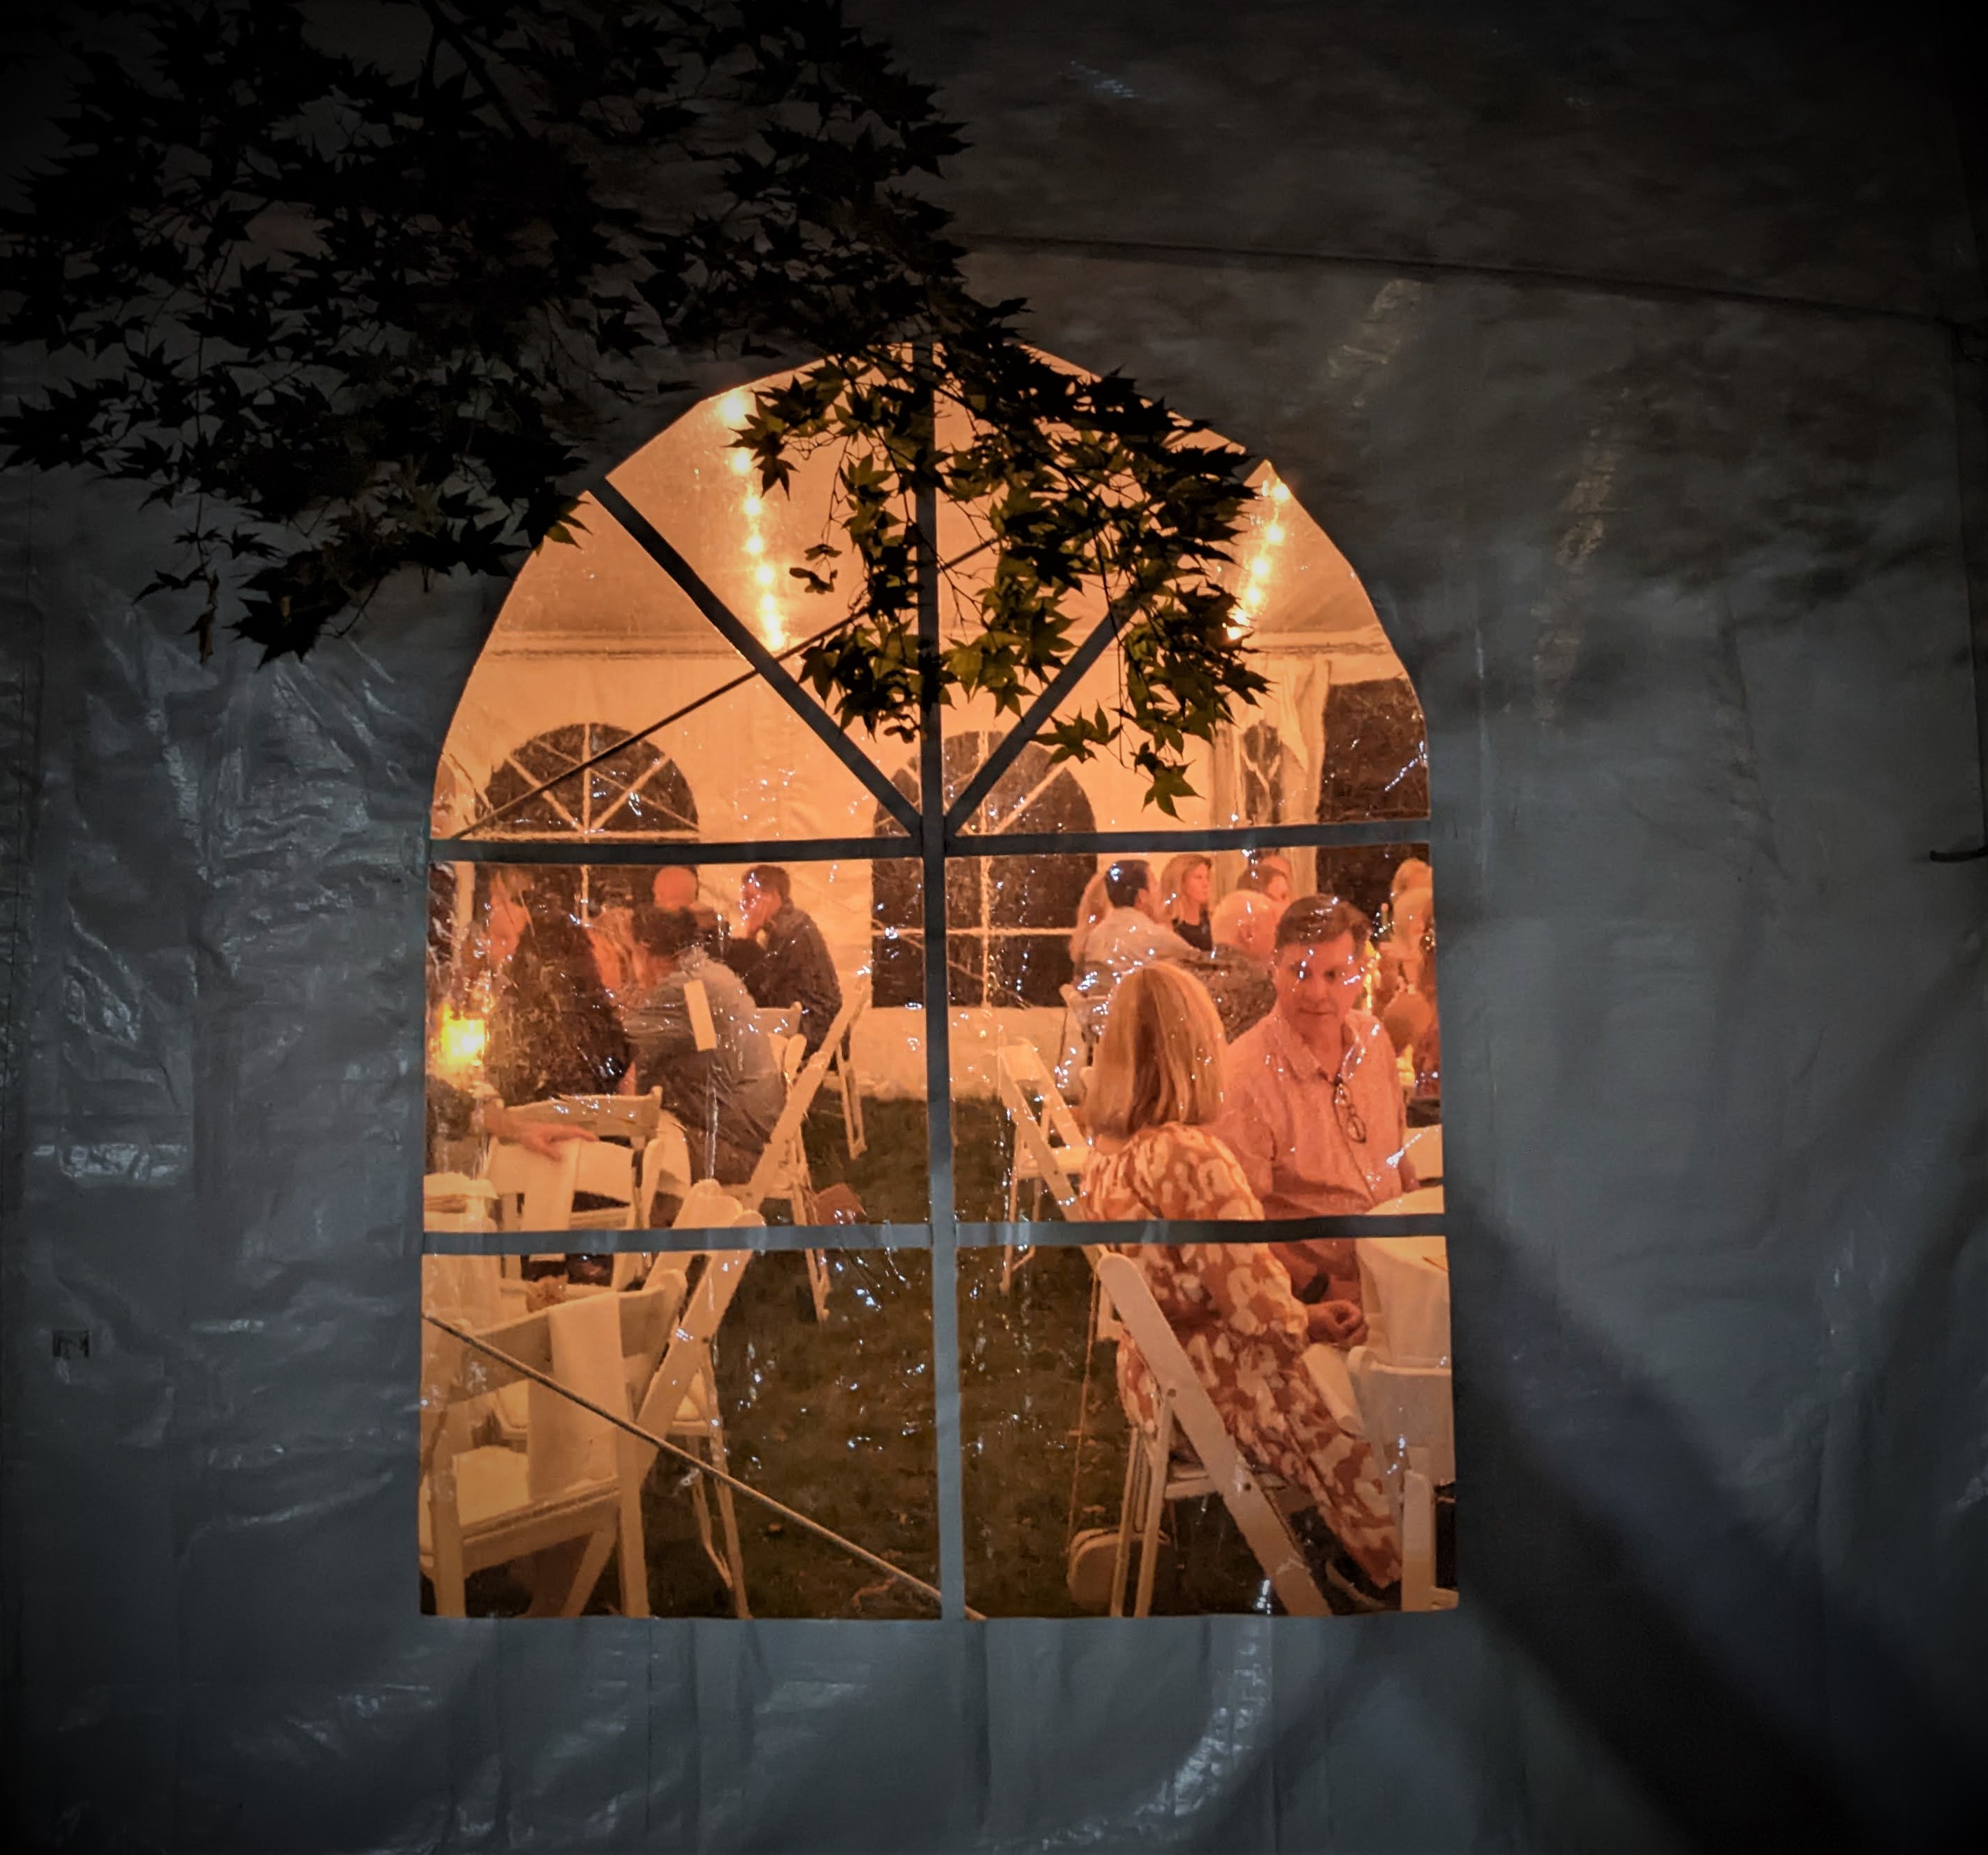 Photo through an orange-lit window in a tent shows guests talking and eating